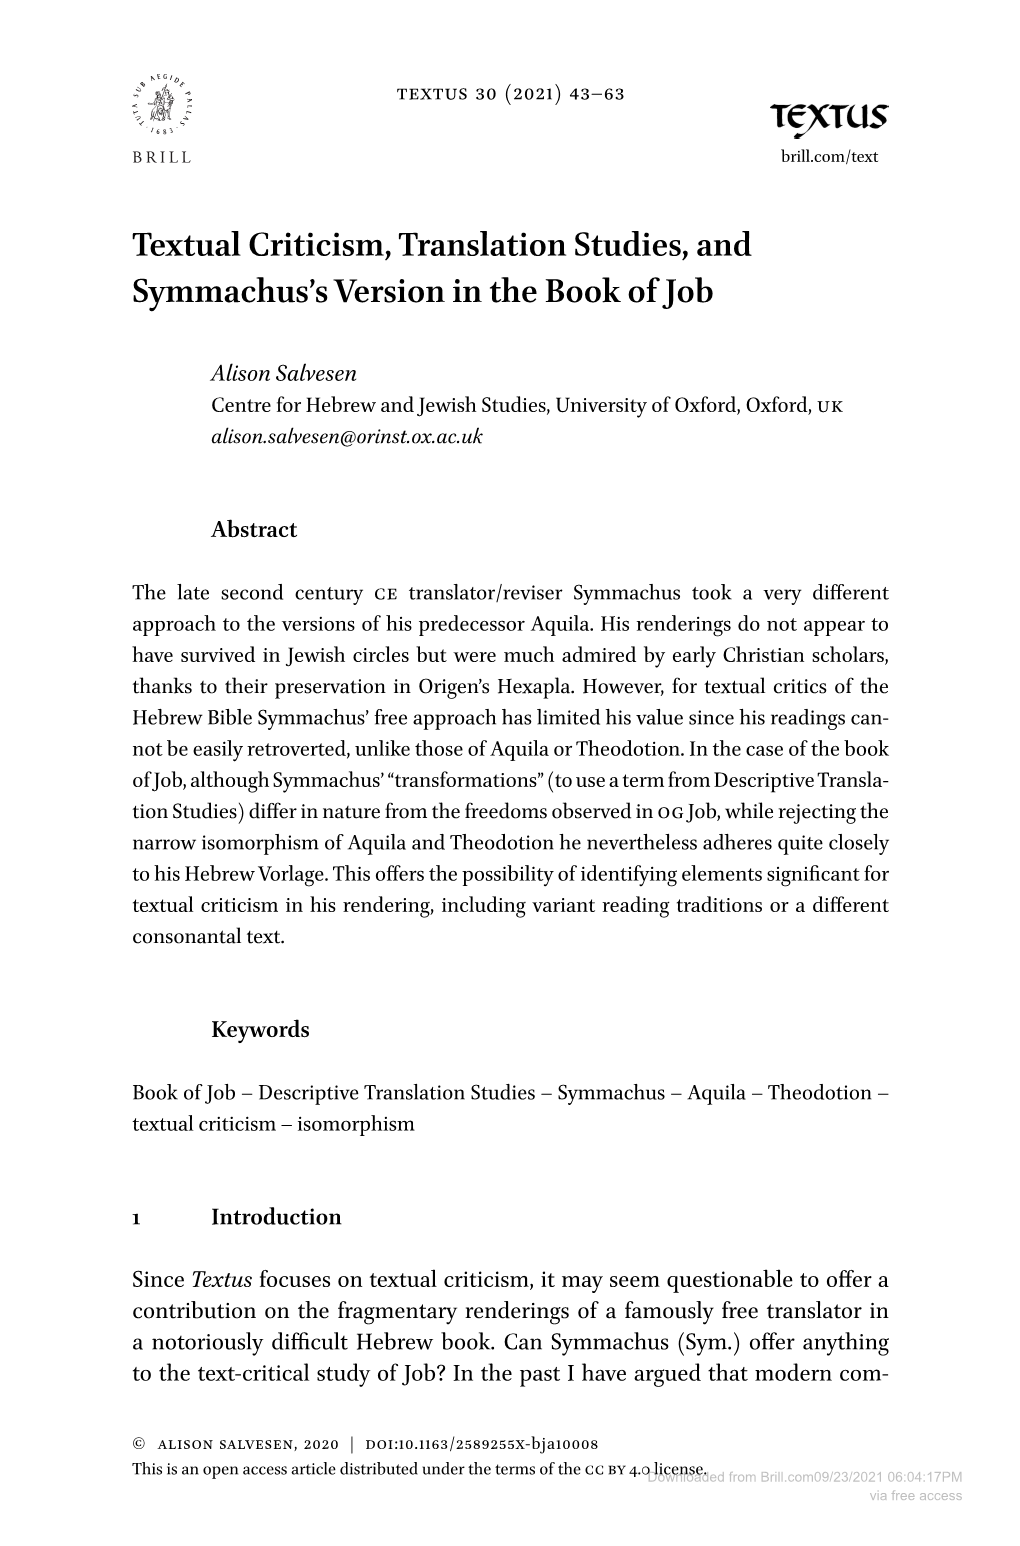 Textual Criticism,Translation Studies, and Symmachus'sversion in The